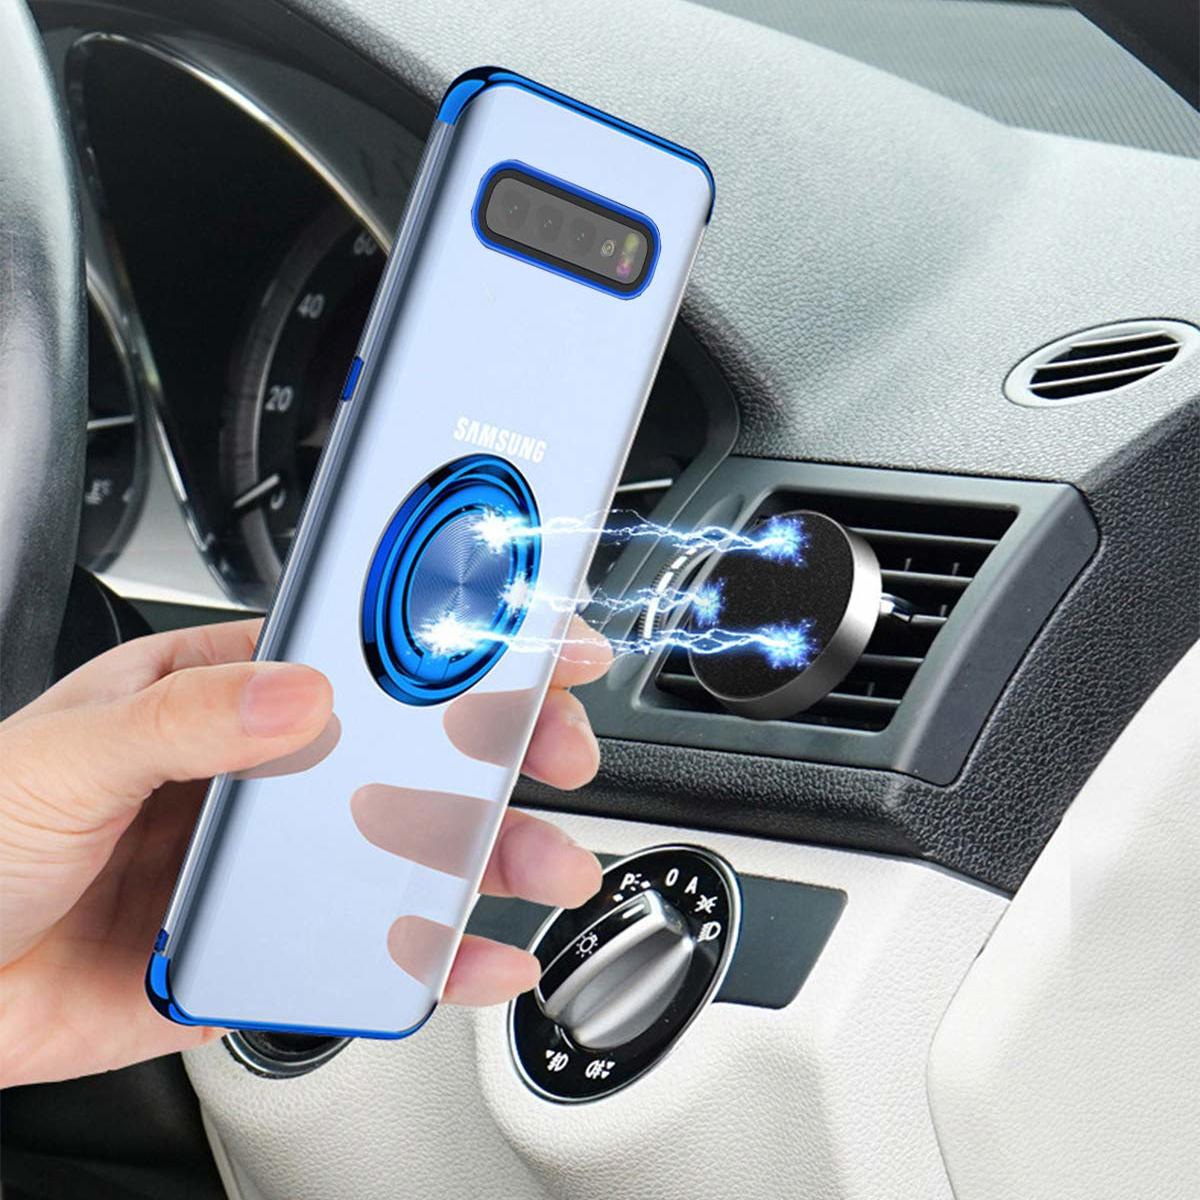 

Bakeey Protective Case For Samsung Galaxy S10 Plus Plating Ring Grip Kickstand Car Magnetic Back Cover